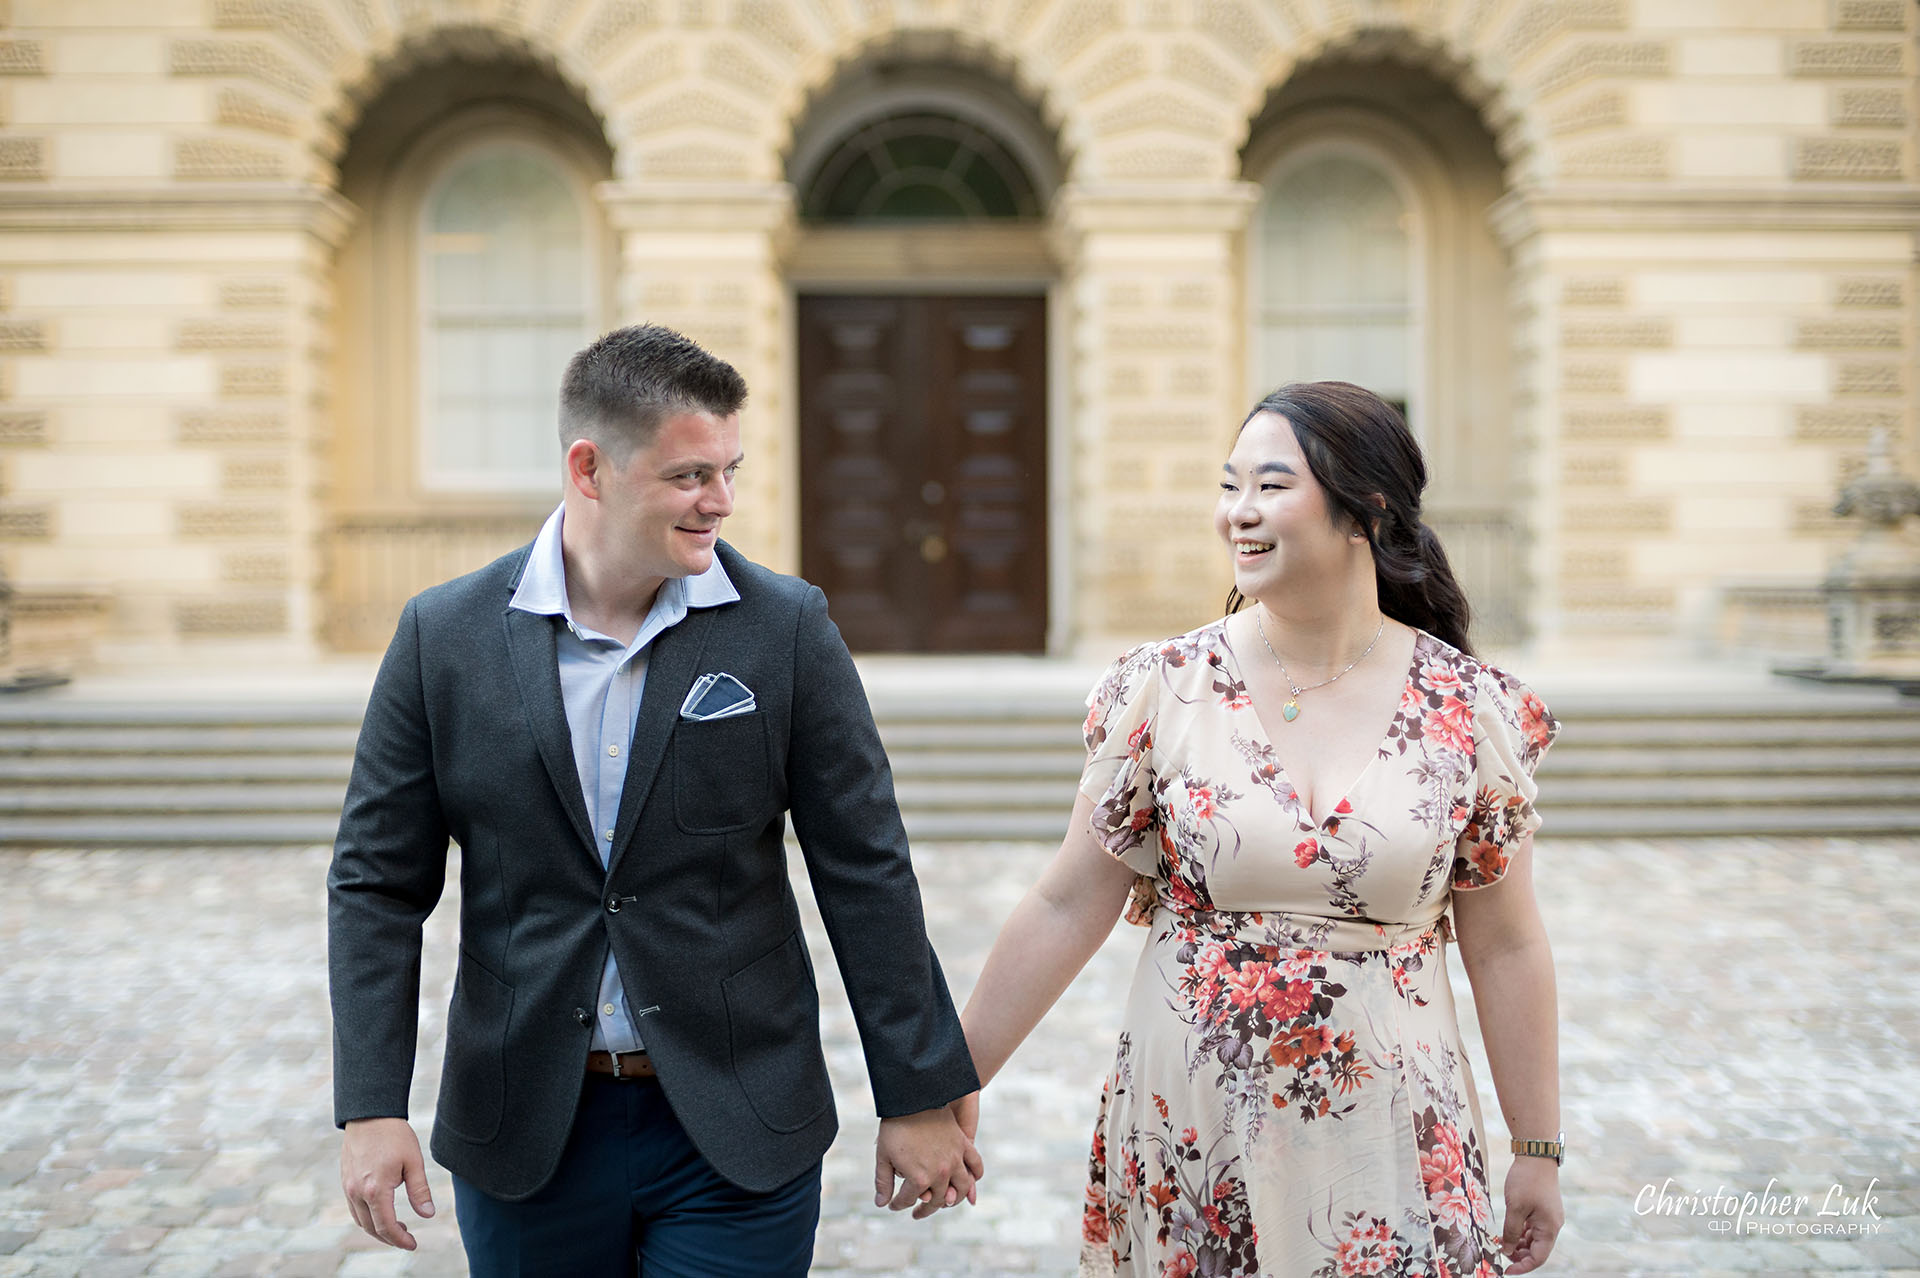 Christopher Luk Toronto Wedding Photographer Engagement Photos Pictures Session Osgoode Hall Nathan Philips Square City Hall Bride Groom Natural Candid Photojournalistic Organic Sunset Holding Hands Walking Together Landscape